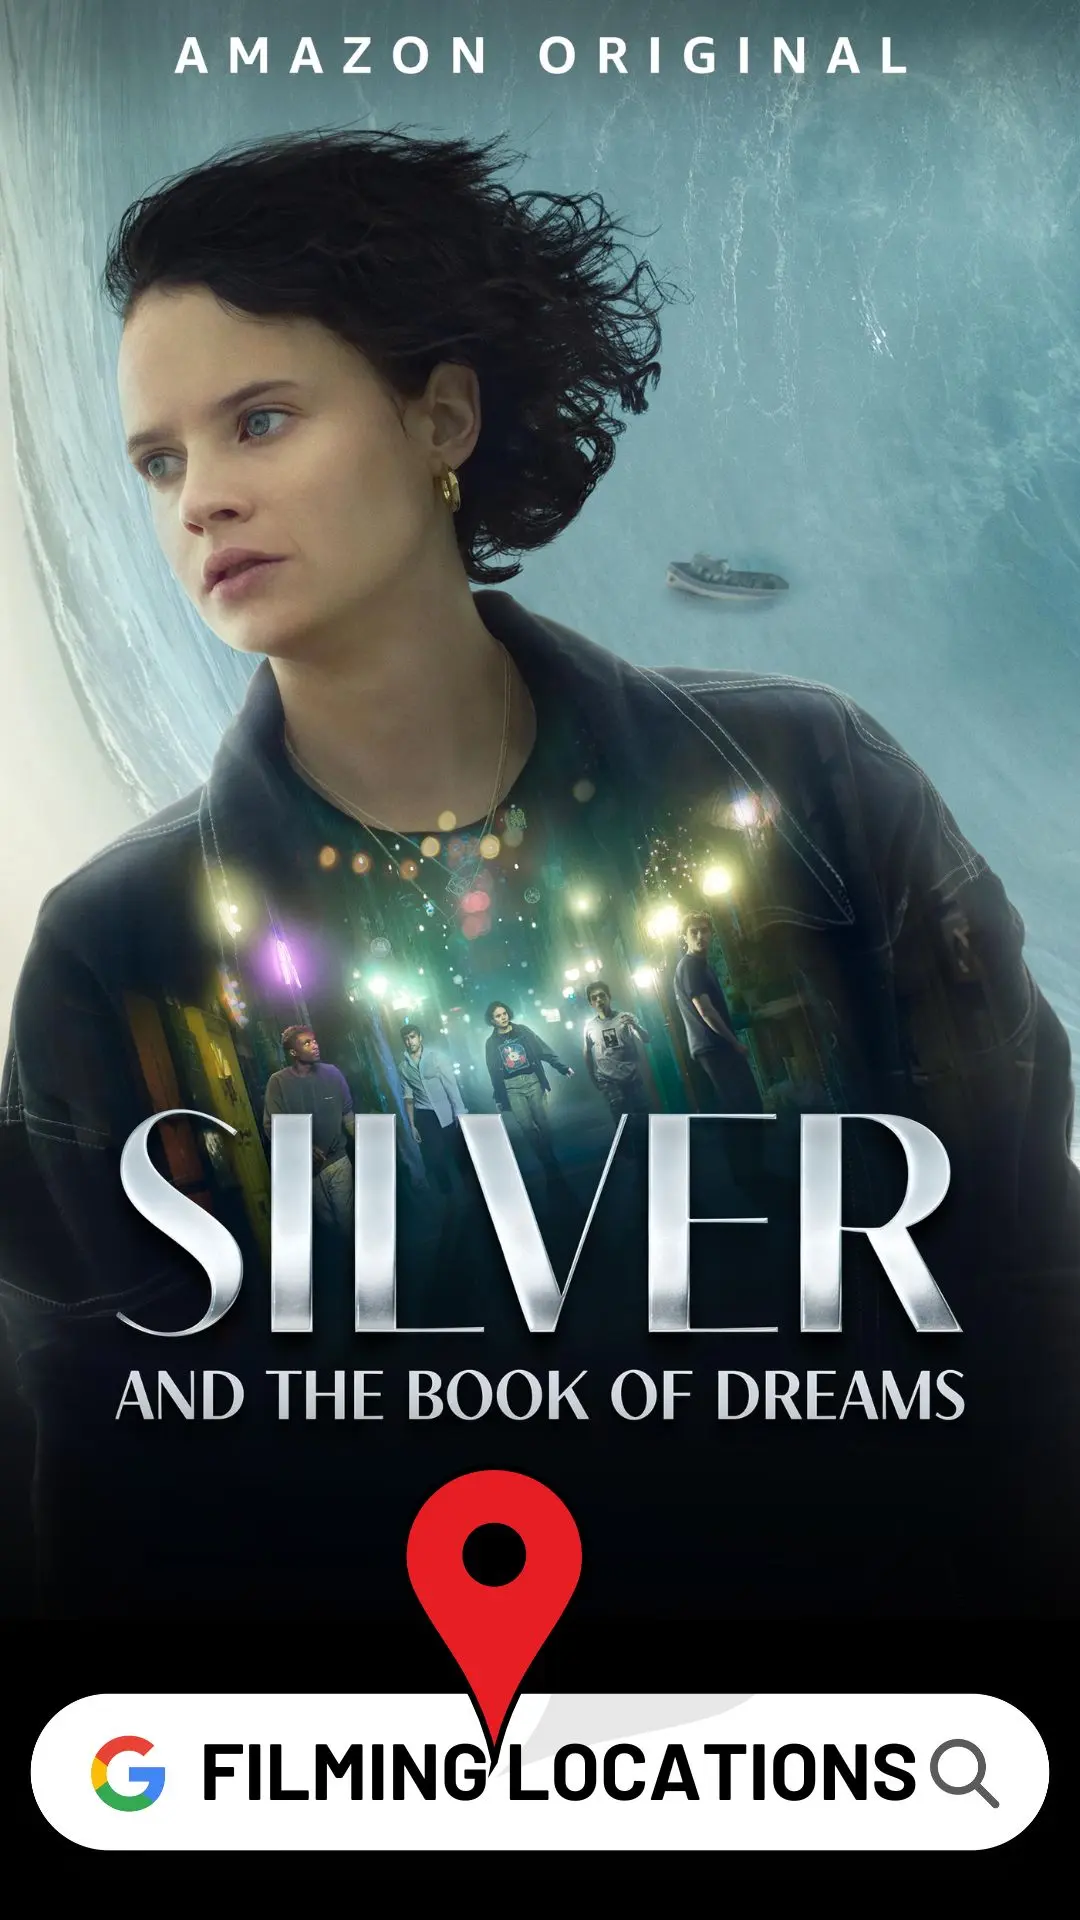 Silver and the Book of Dreams Filming Locations